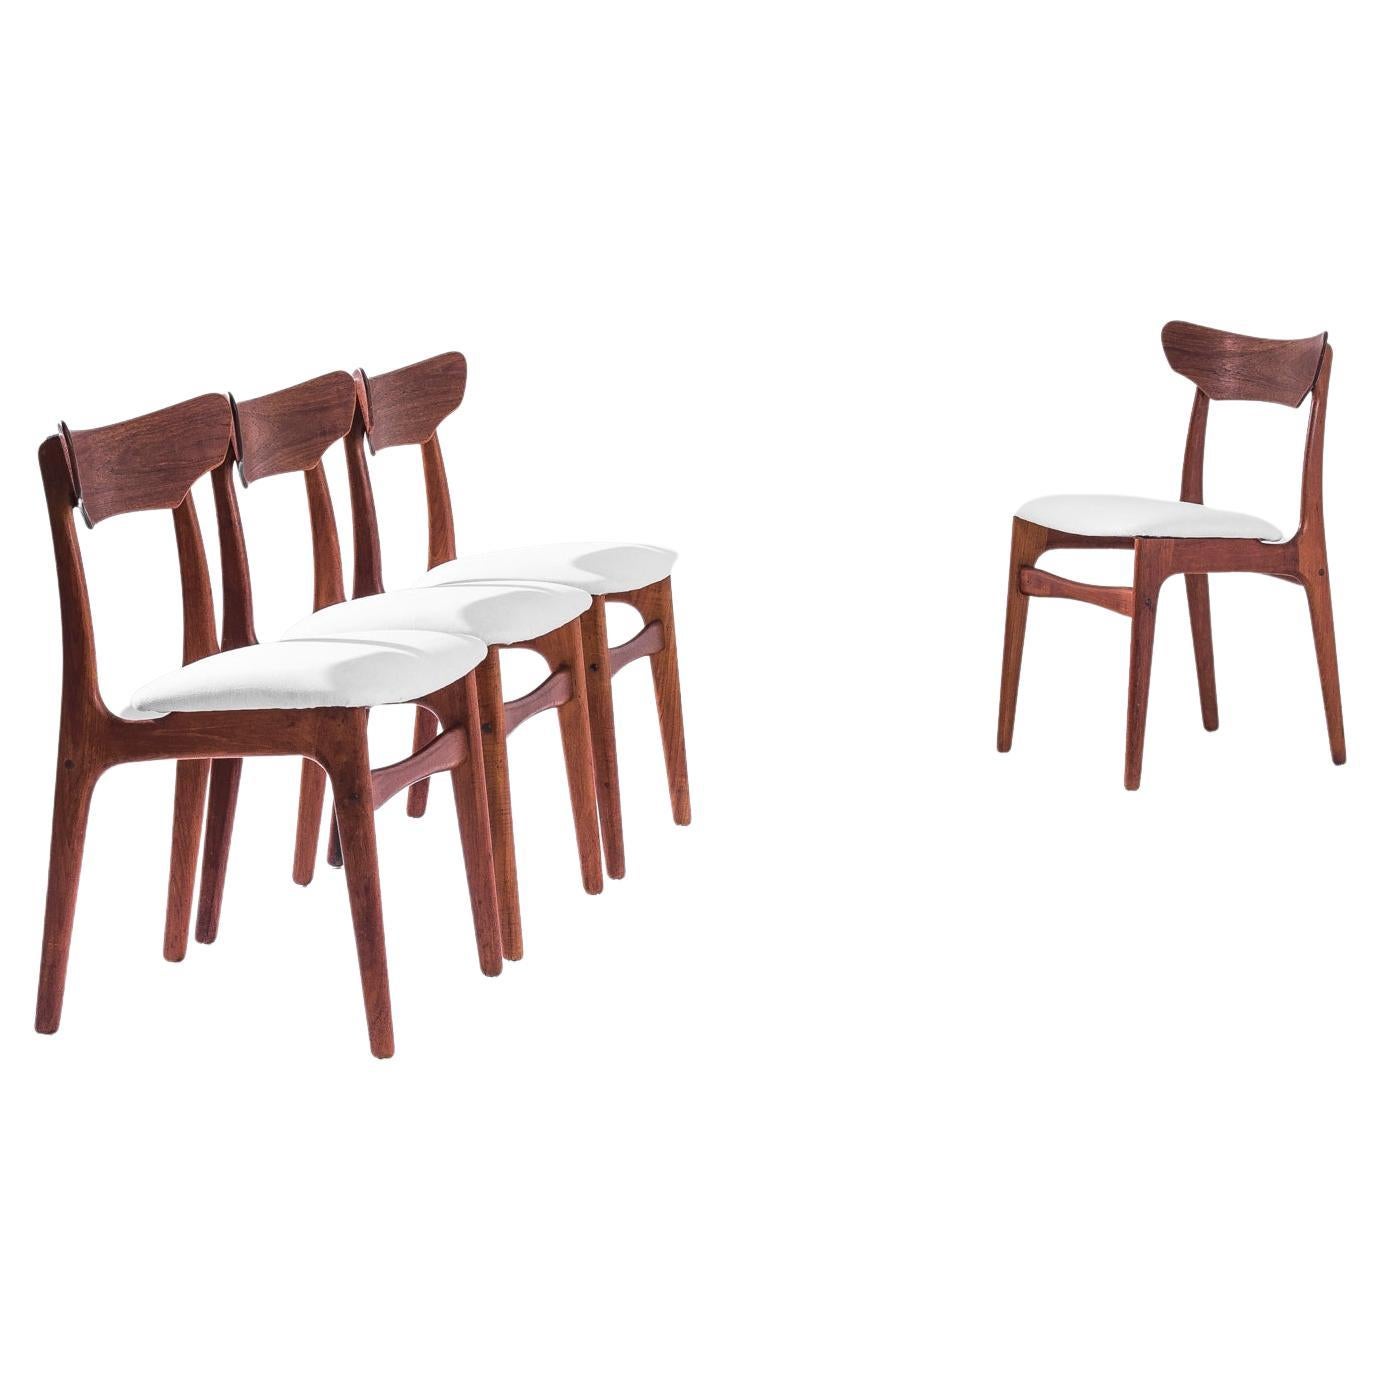 Schionning & Elgaard Dining Chairs, Set of Four